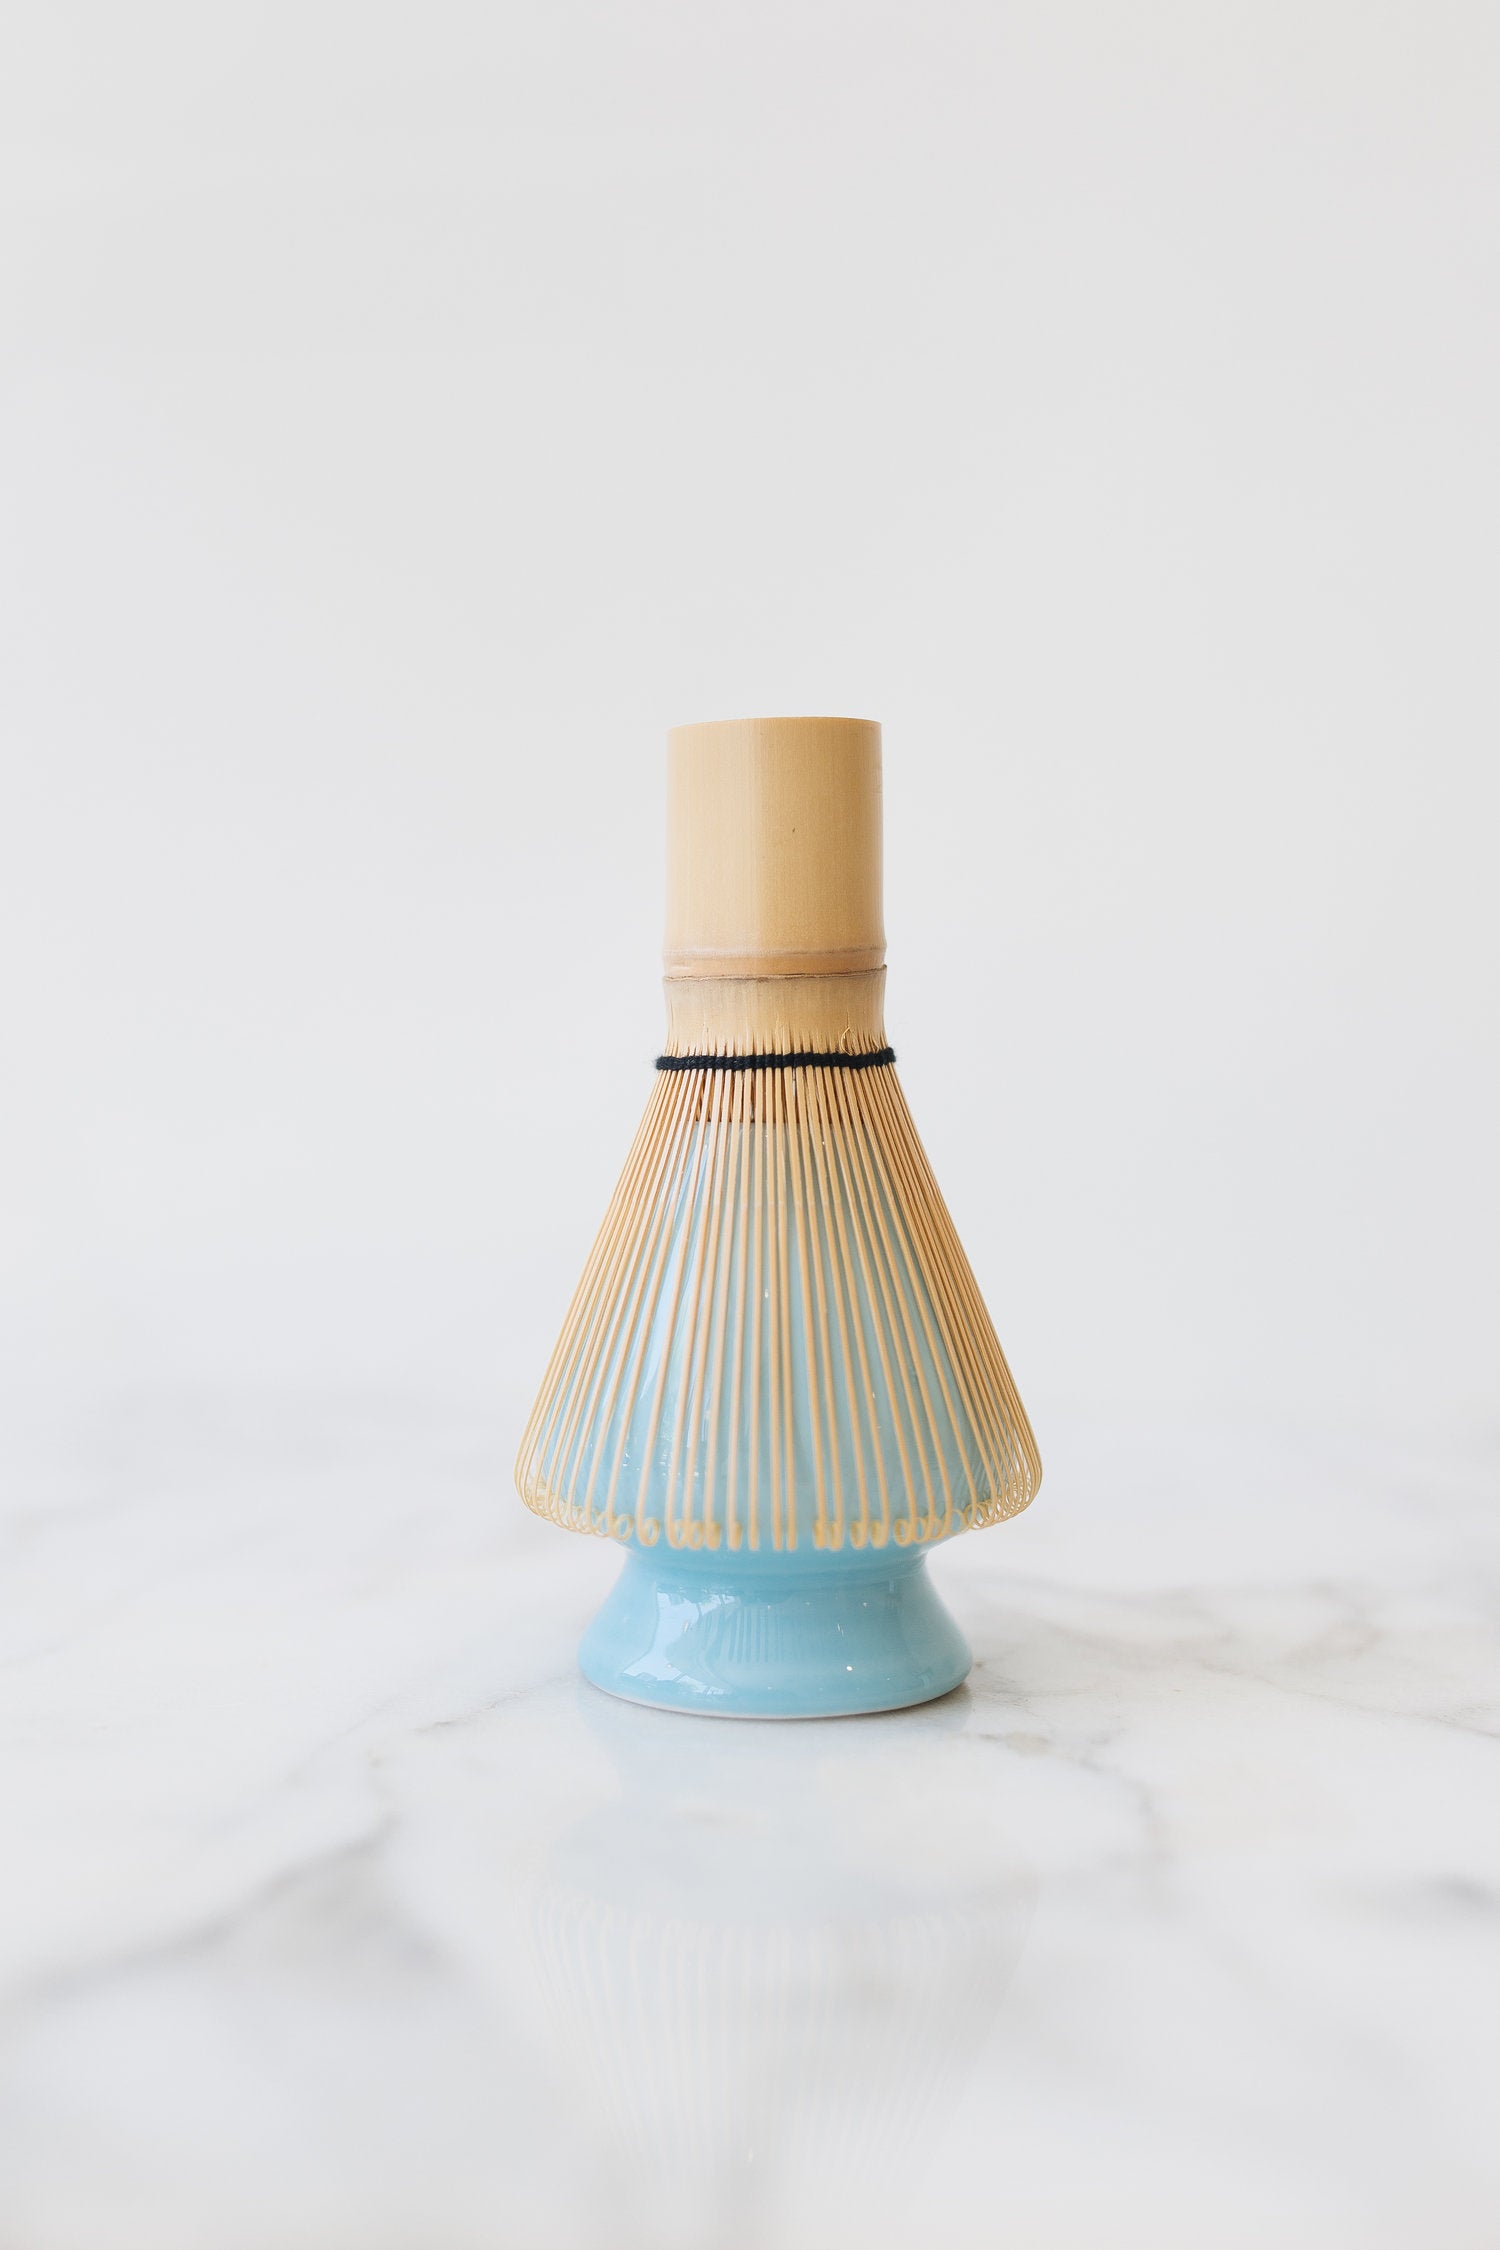 Higoodz Chasen, Durable Matcha Whisk, For Office Home 